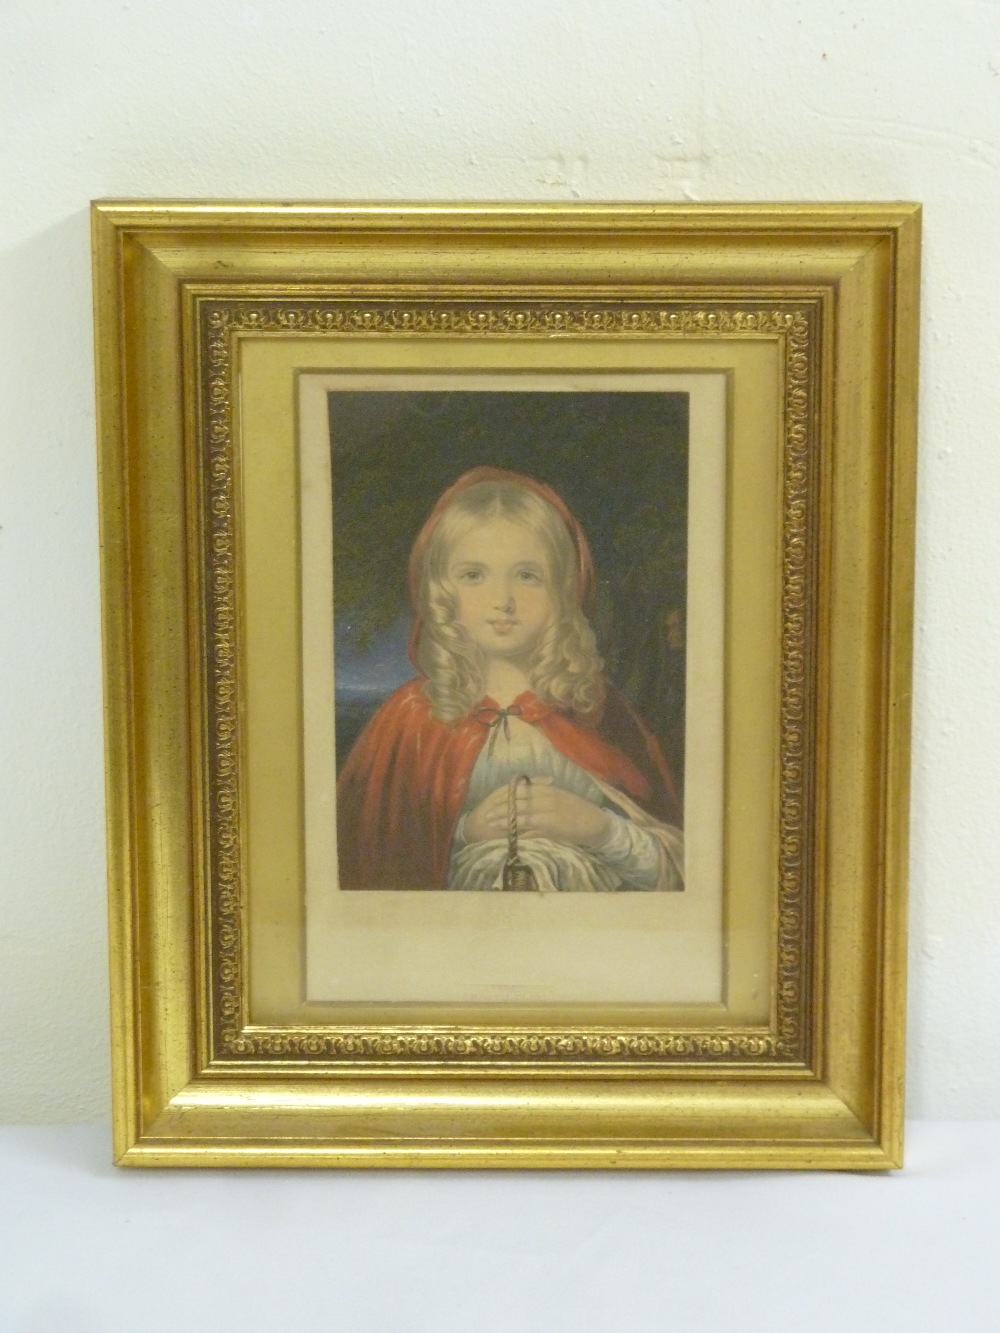 A framed and glazed Baxter print of Little Red Riding Hood, 19.5 x 12.5cm